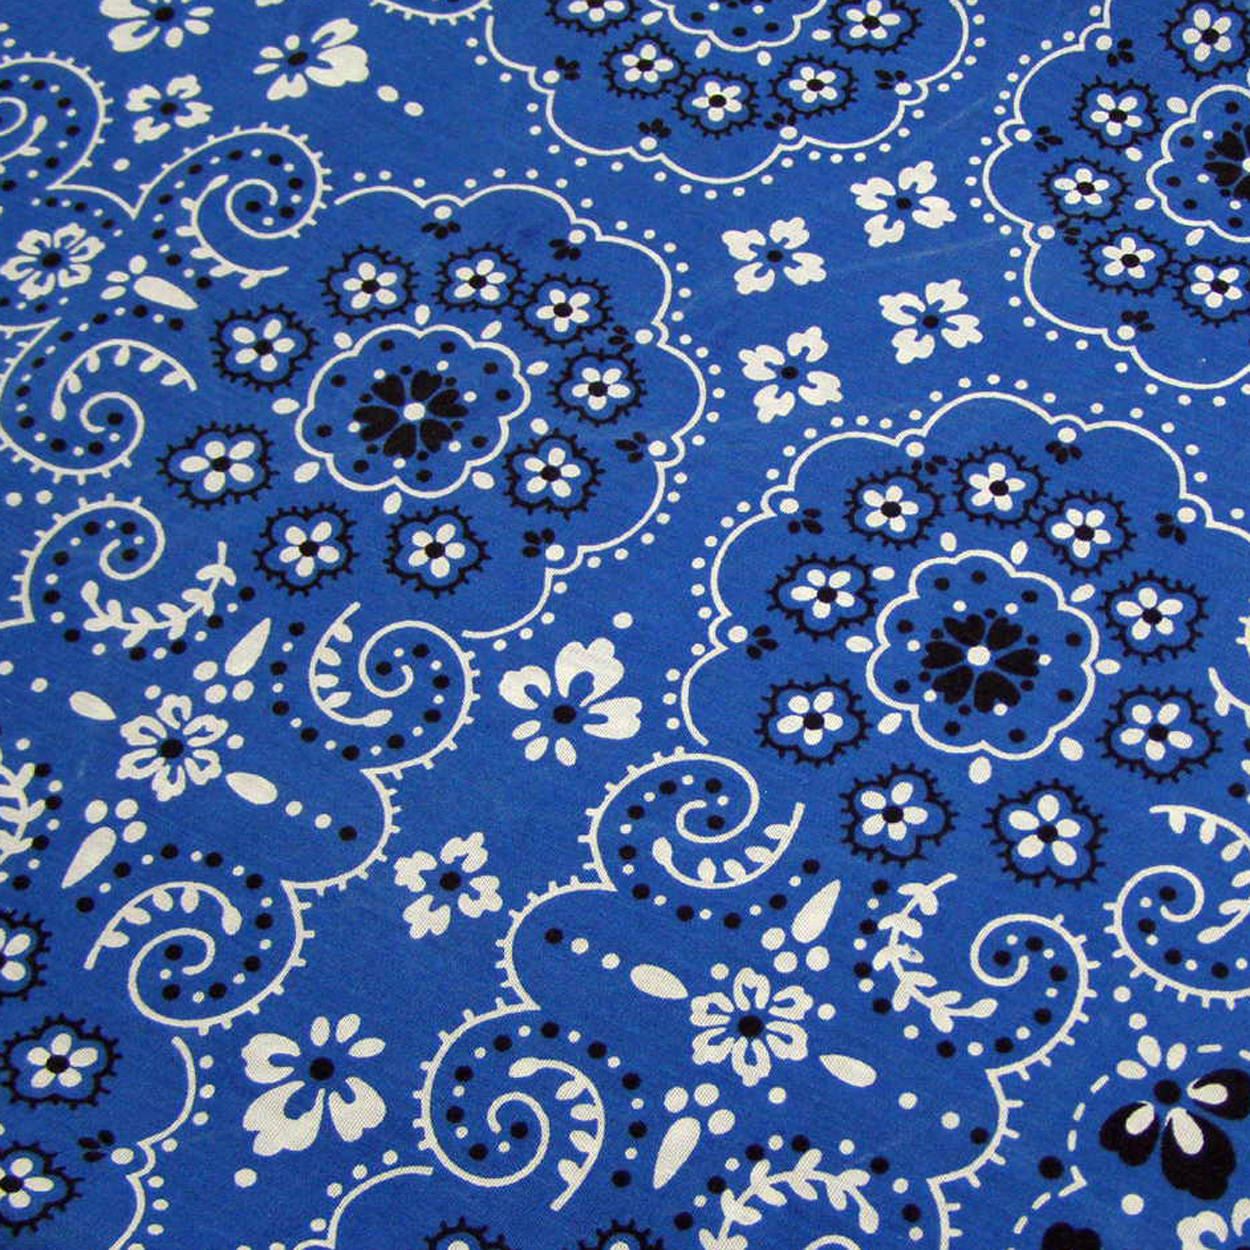 Classic Blue Bandana With Floral Pattern Background